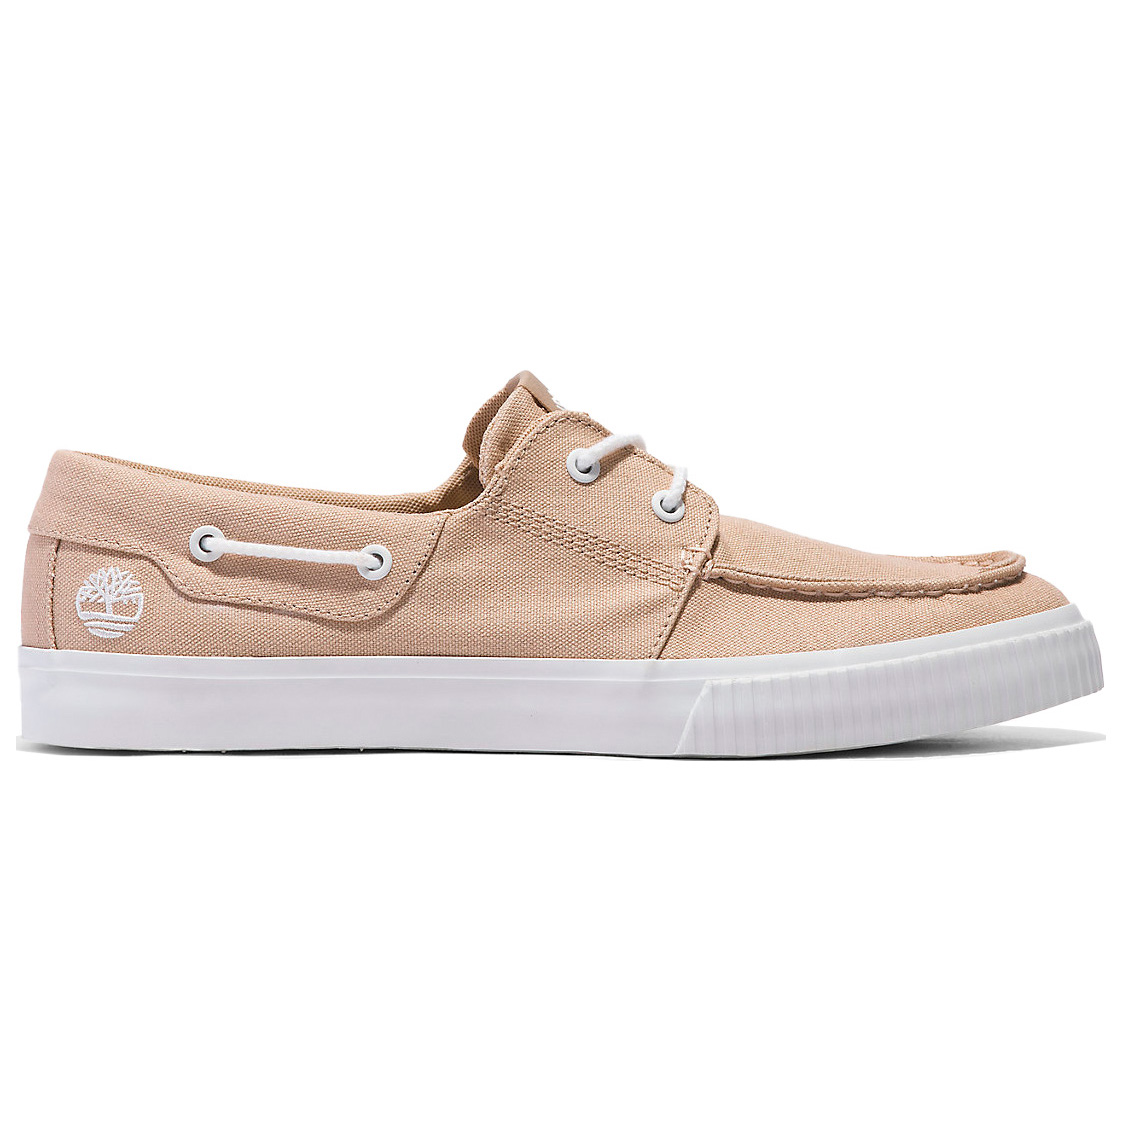 кроссовки timberland mylo bay low lace up цвет light taupe canvas Кроссовки Timberland Mylo Bay, цвет Light Beige Canvas